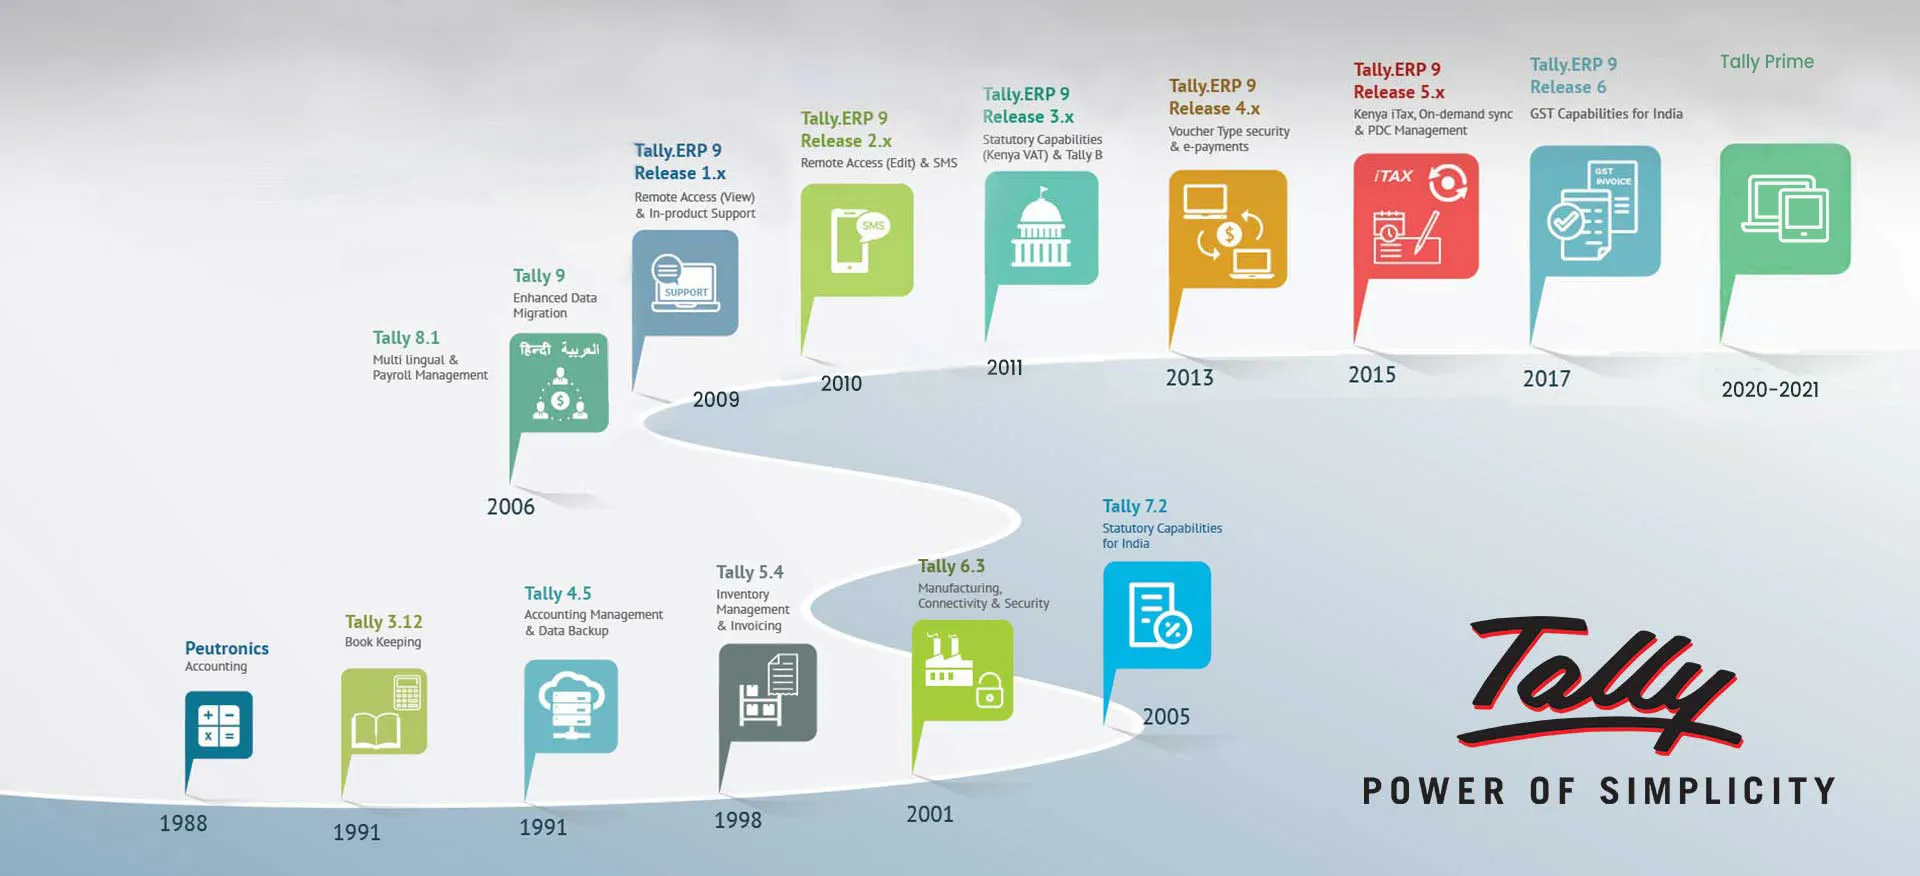 Timeline of the first version of the tallysolution product, Peutronics, from 1988 to 2005.